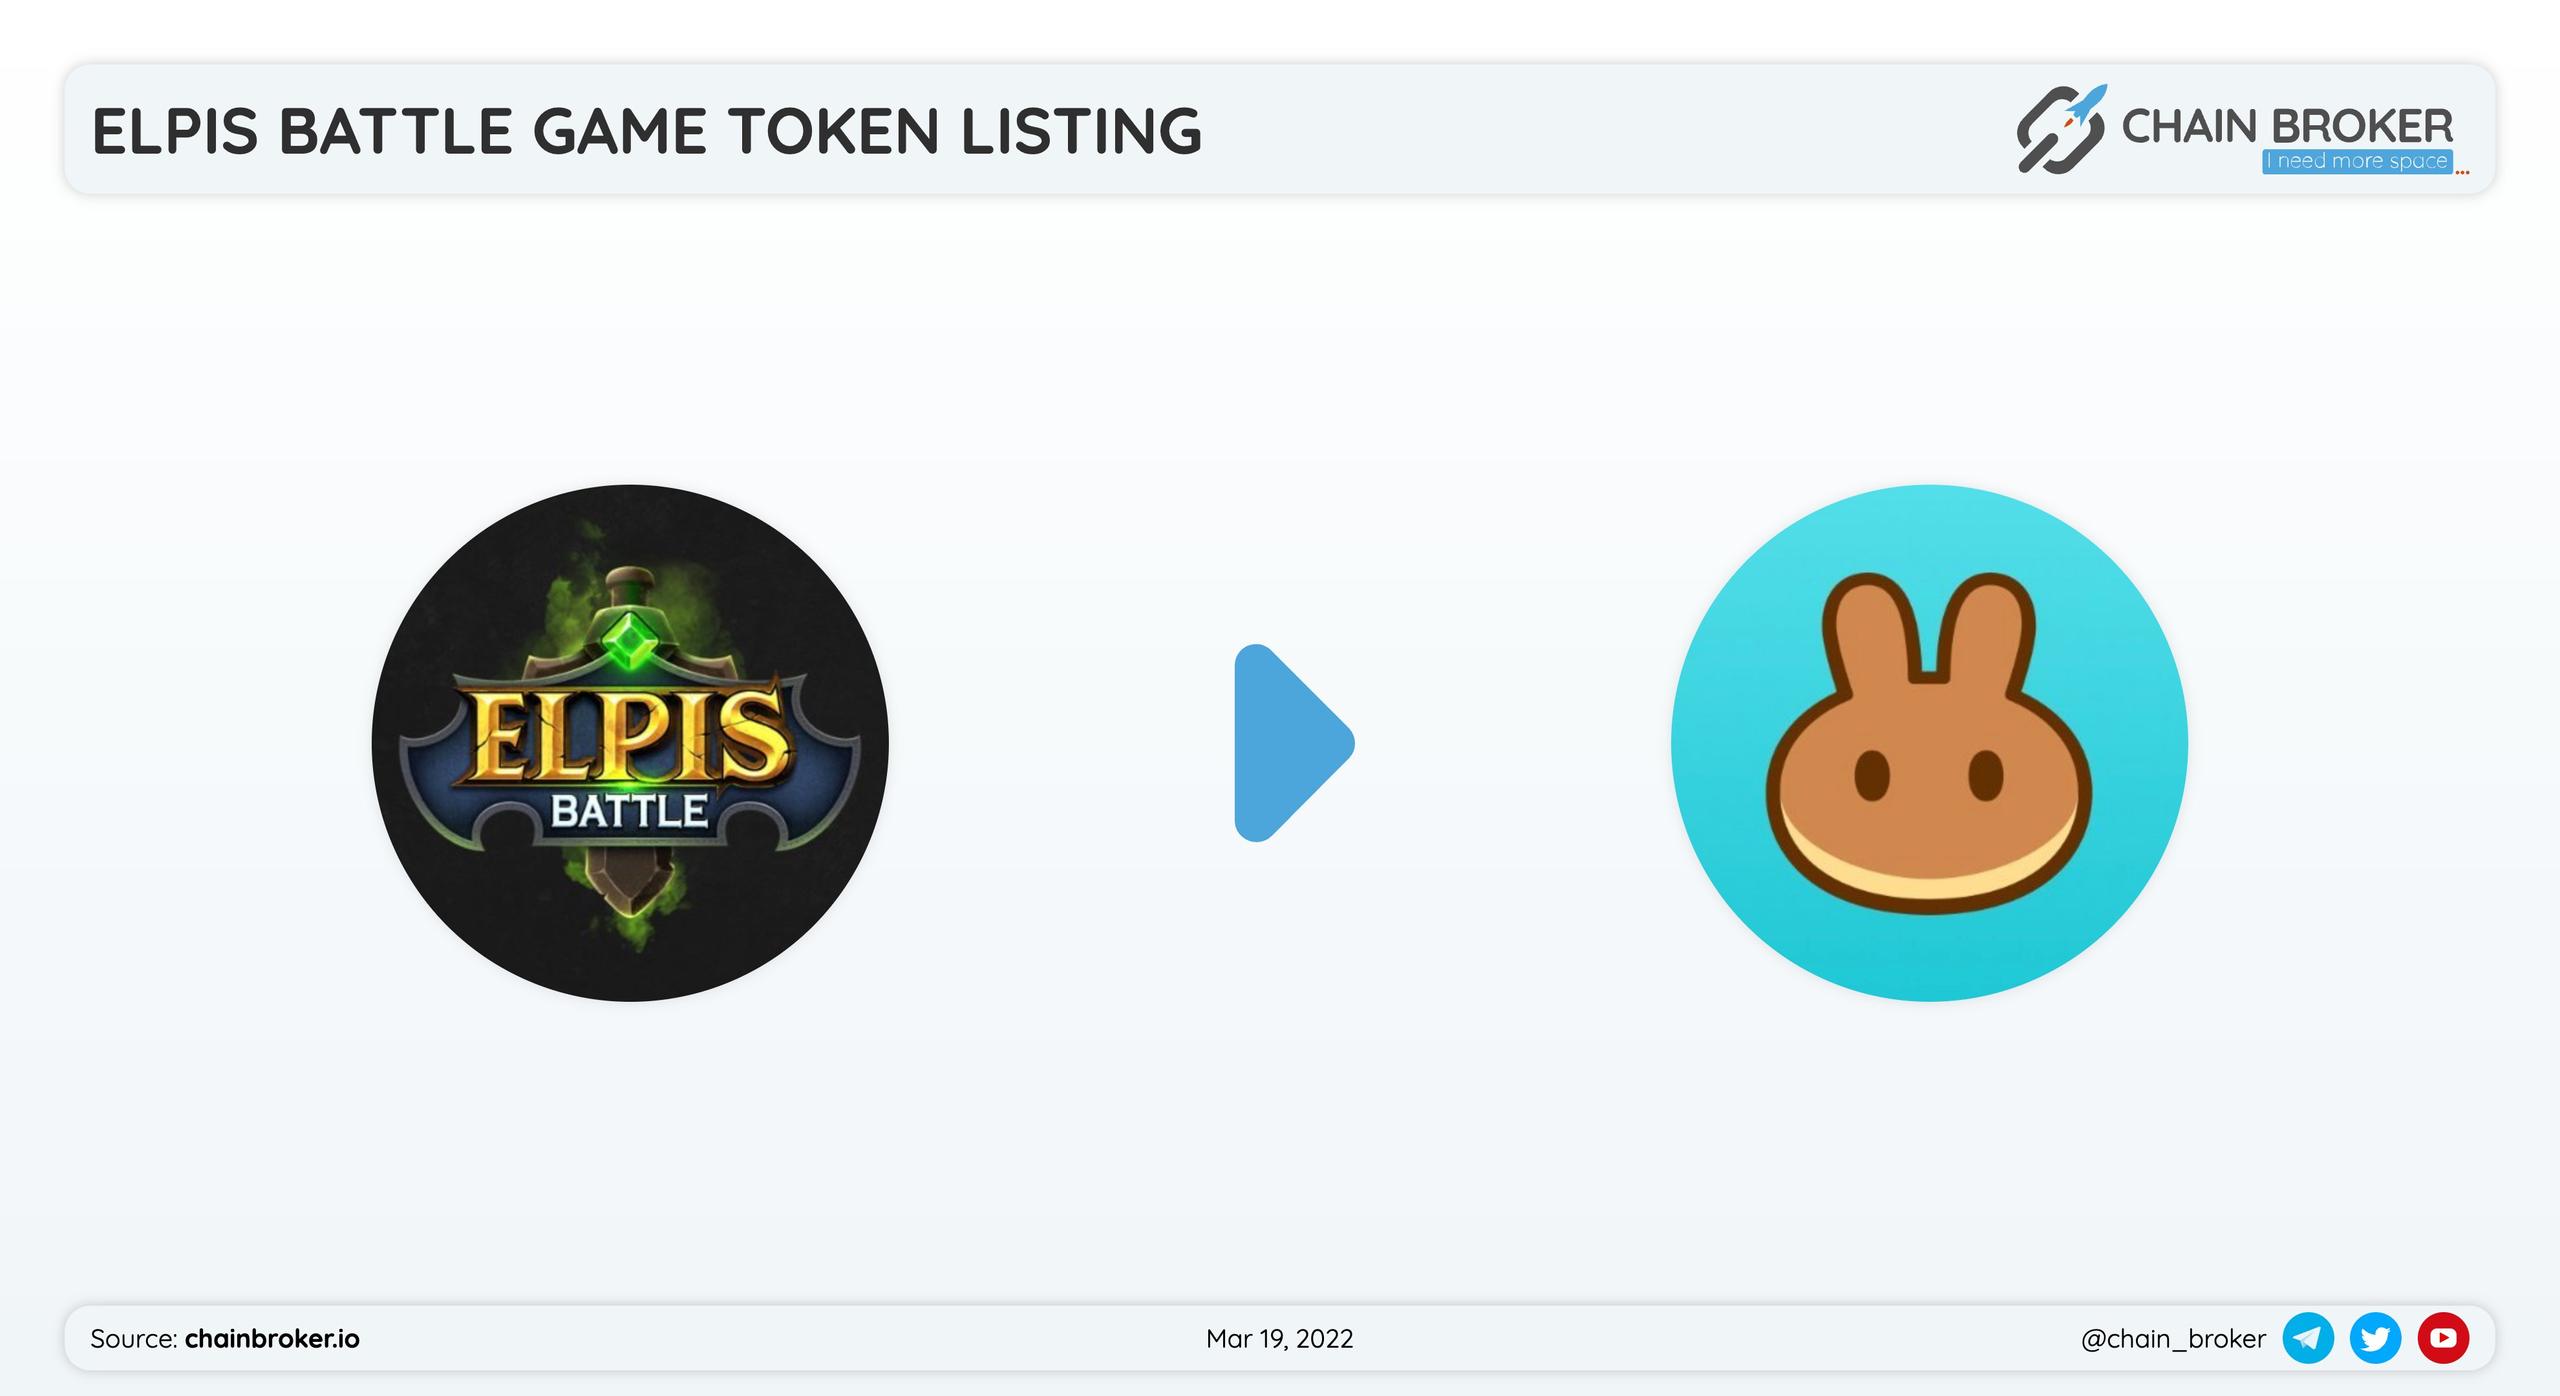 Elpis Battle has partnered with and PancakeSwap for a token listing.